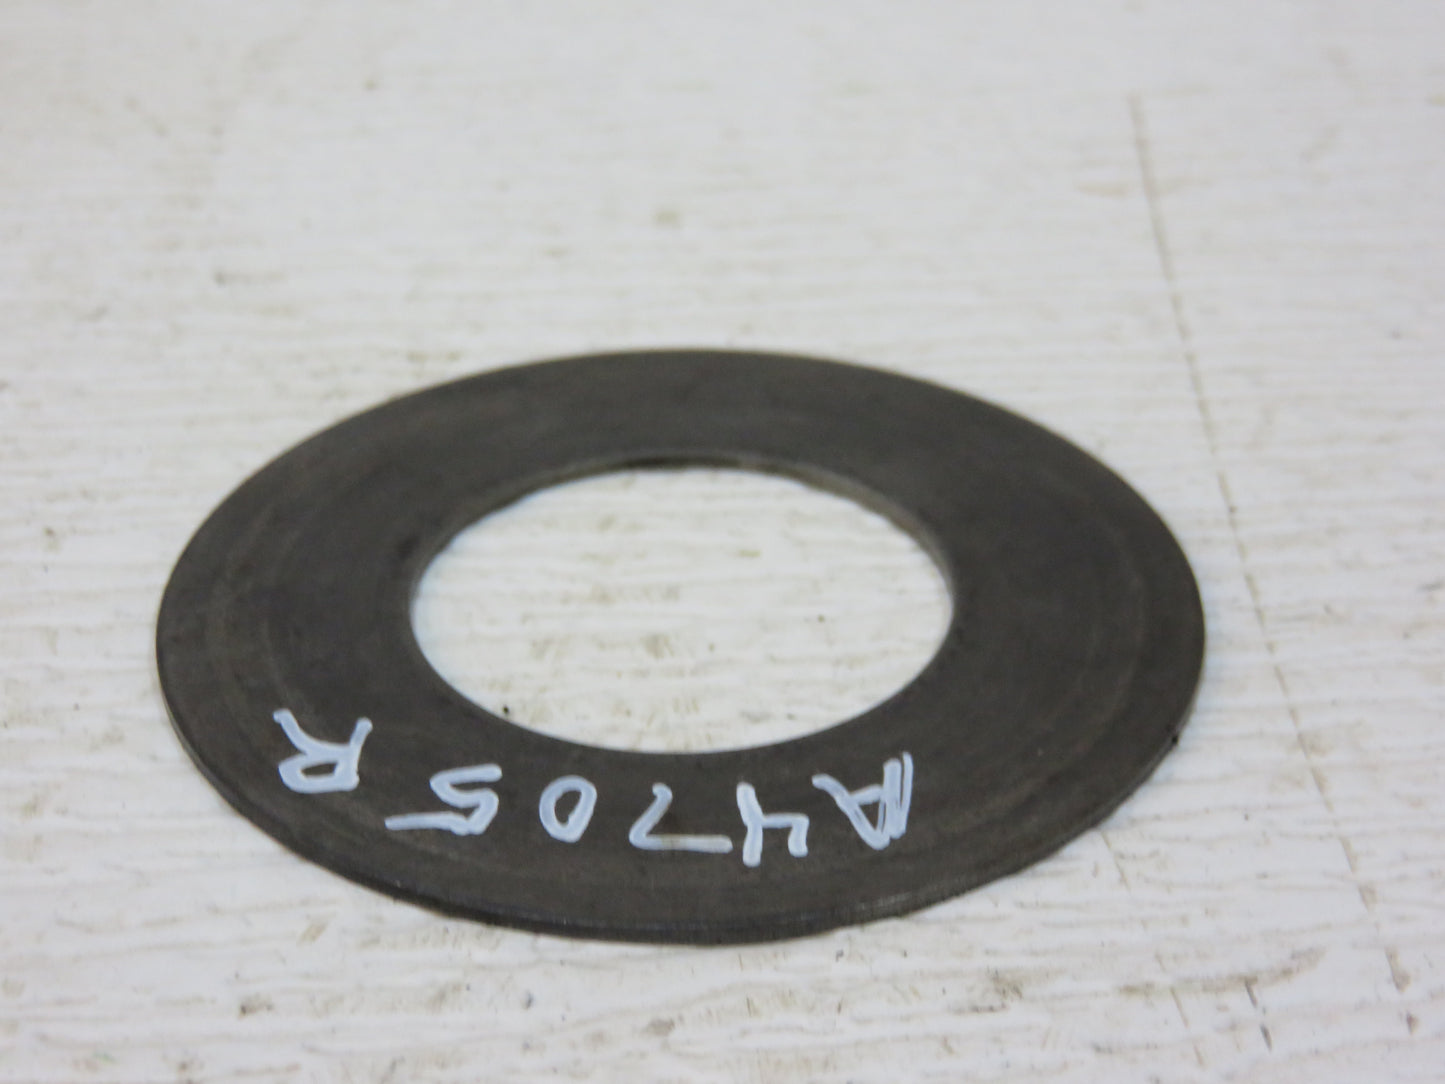 A4705R John Deere PTO Clutch Shaft Washer For 50, 60, 70, 80, 520, 620, 720, 820, 530, 630, 730, 830, 840